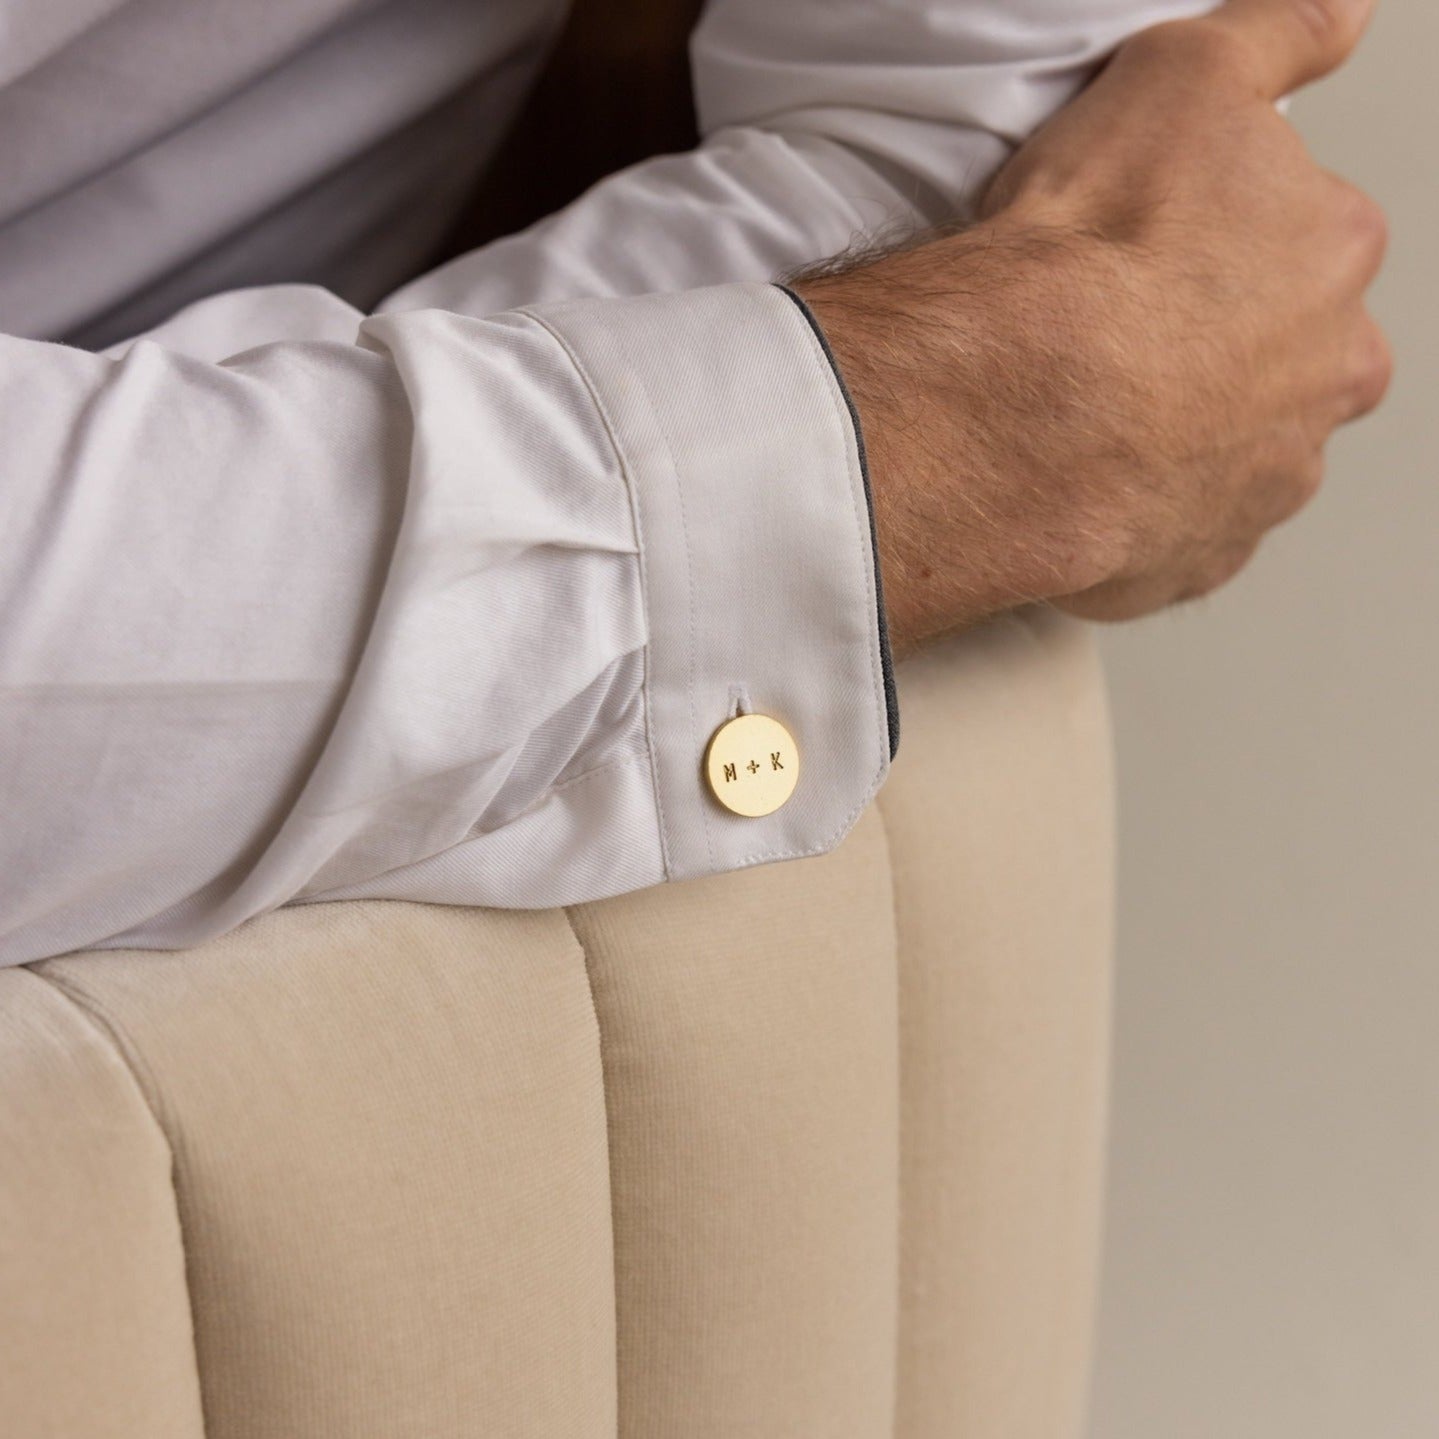 Button Cover Monogram Personalised Engraved Cufflinks 